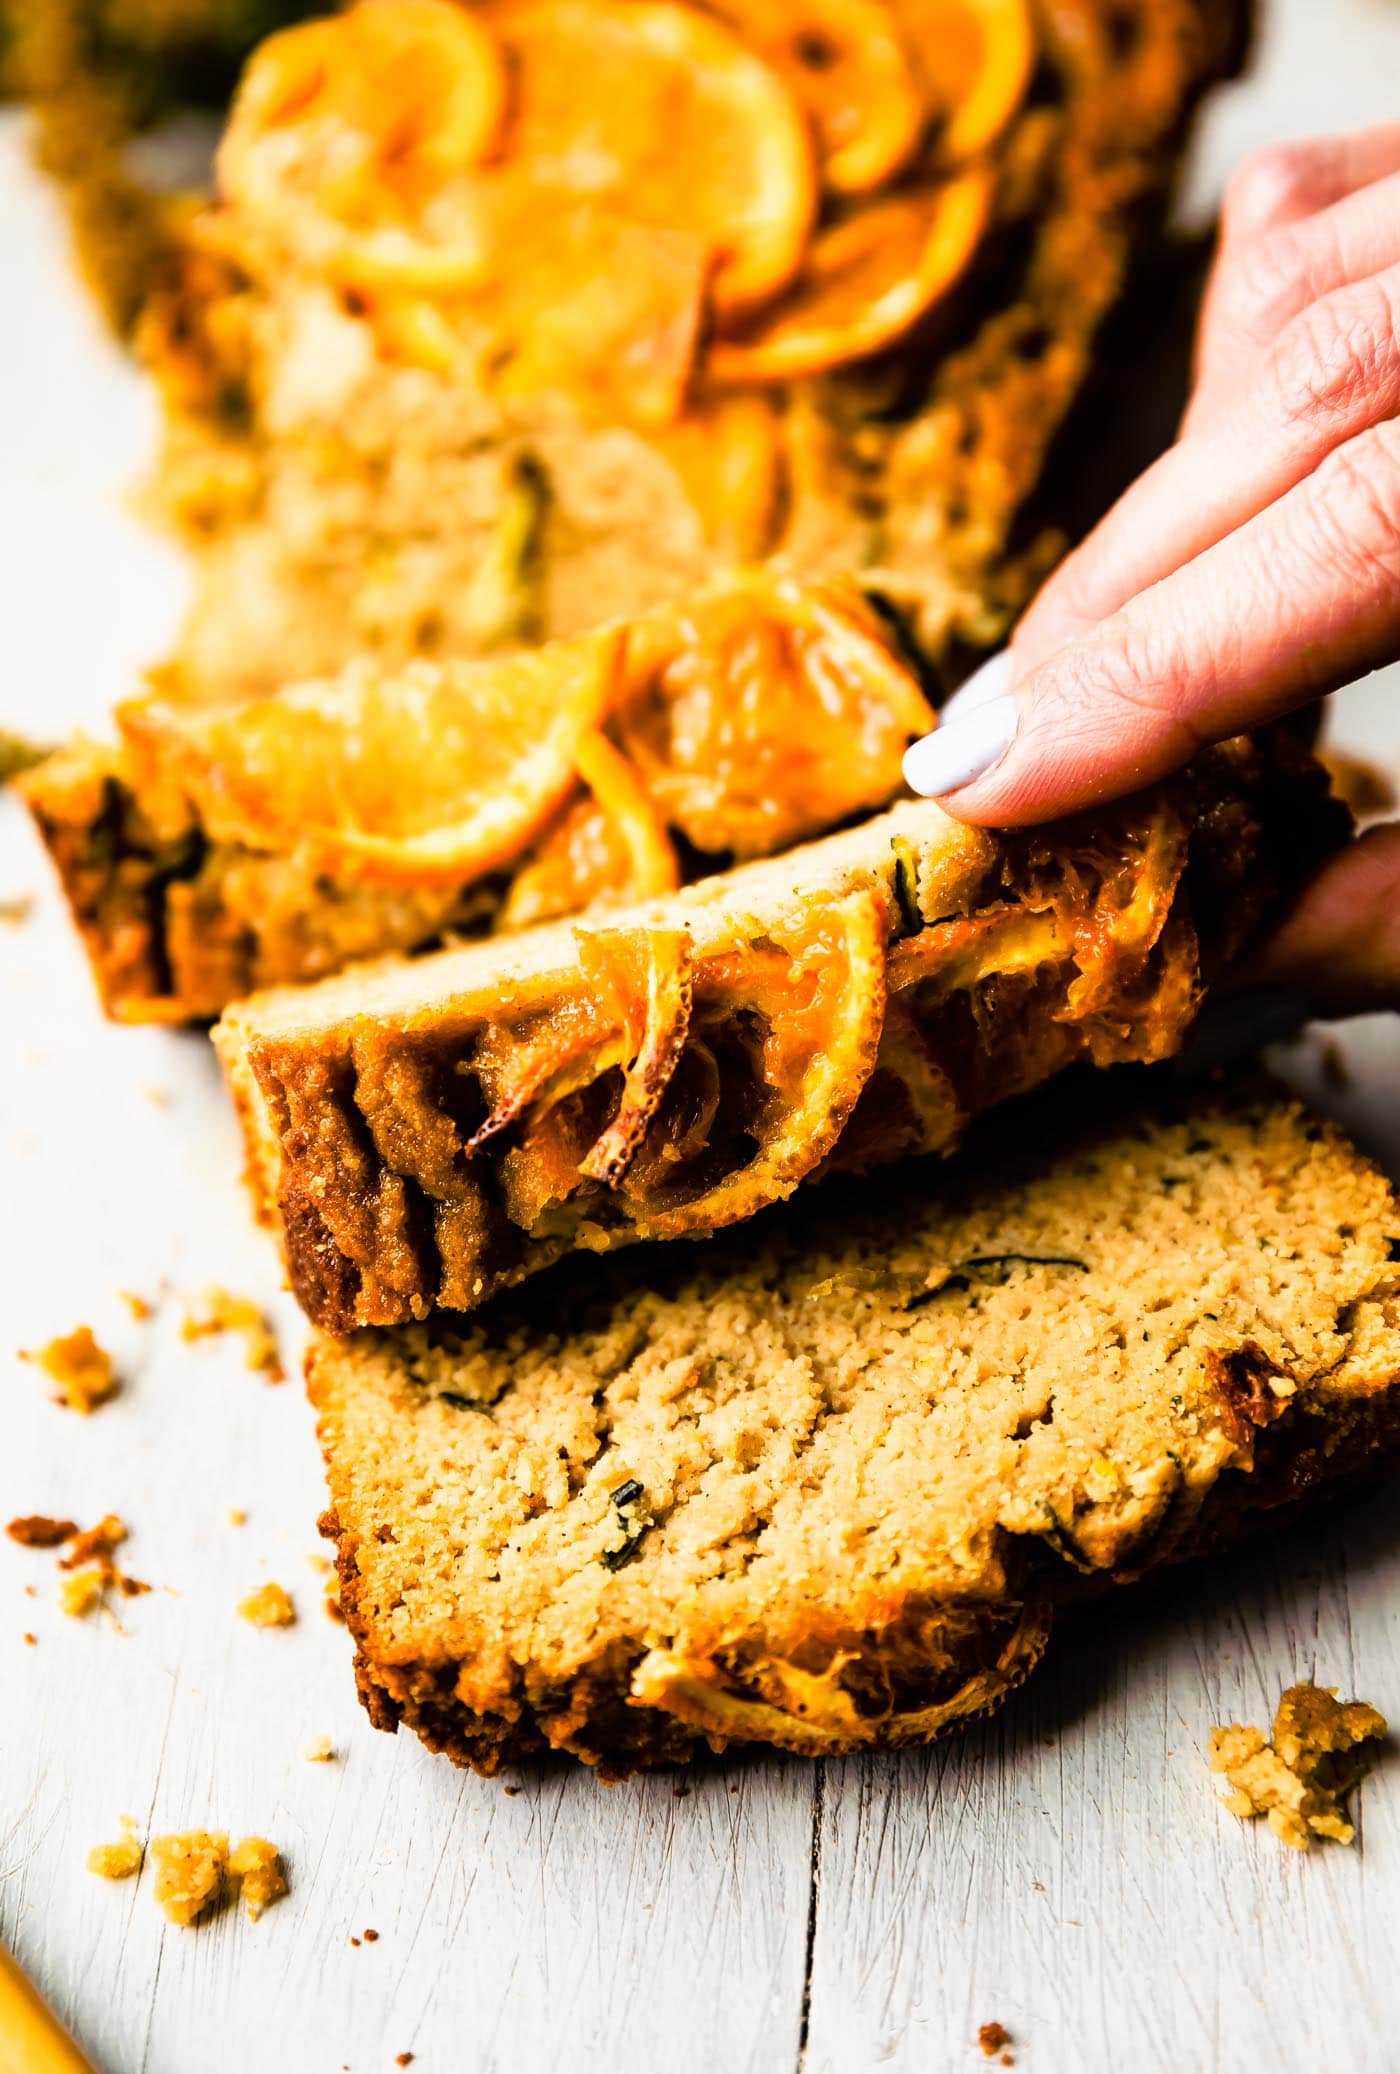 A hand lifting a thick slice of orange zucchini bread from a cutting board holding several slices.